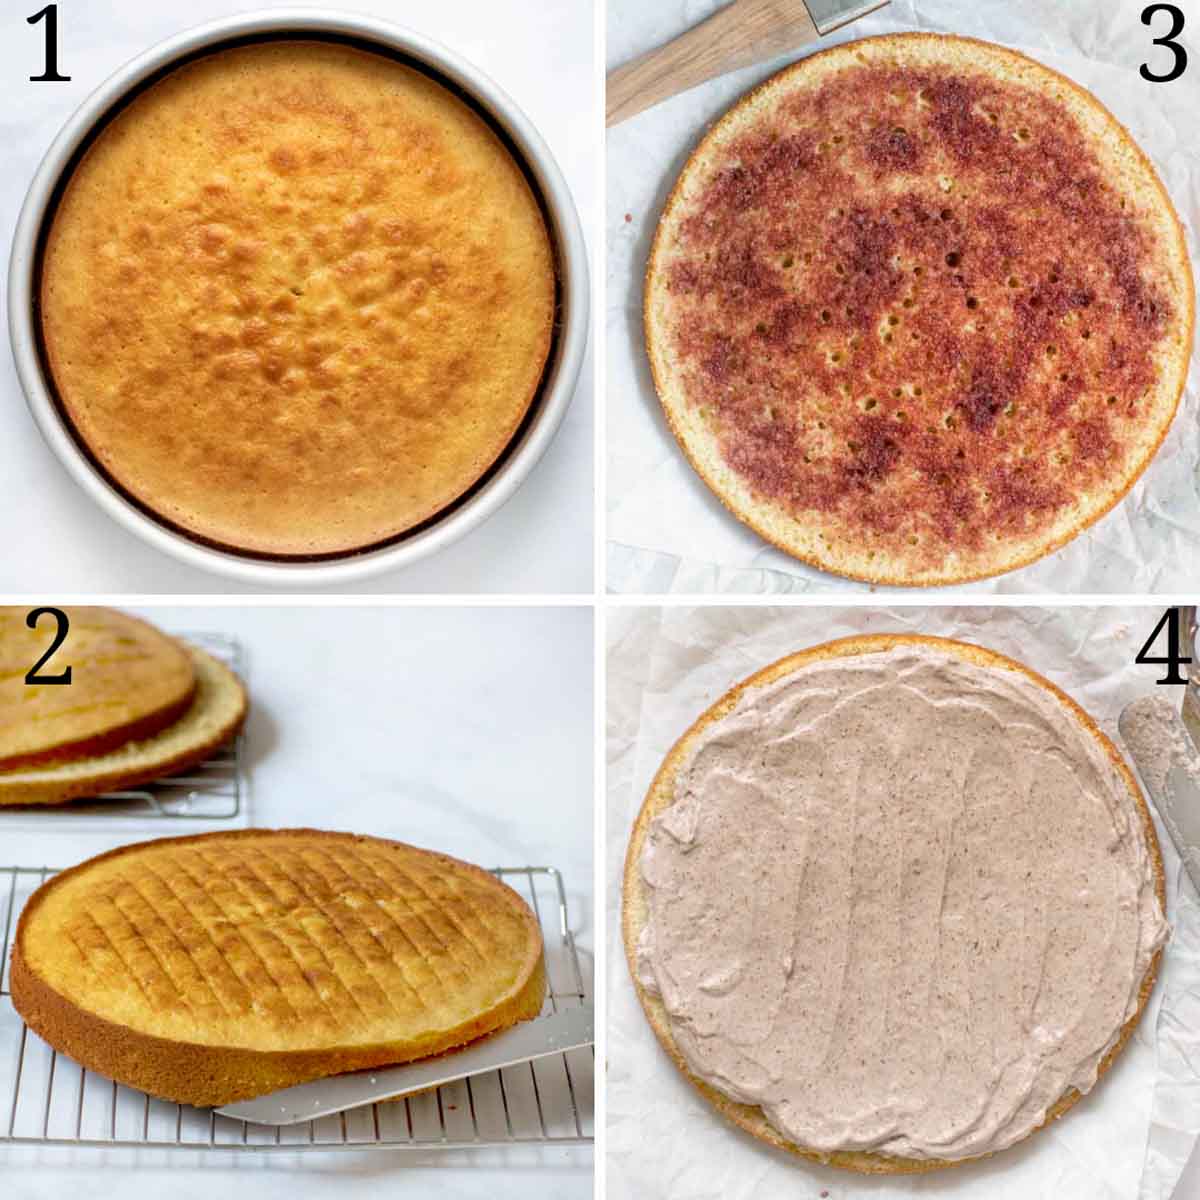 four images showing the assembly of the pomegranate mousse cake